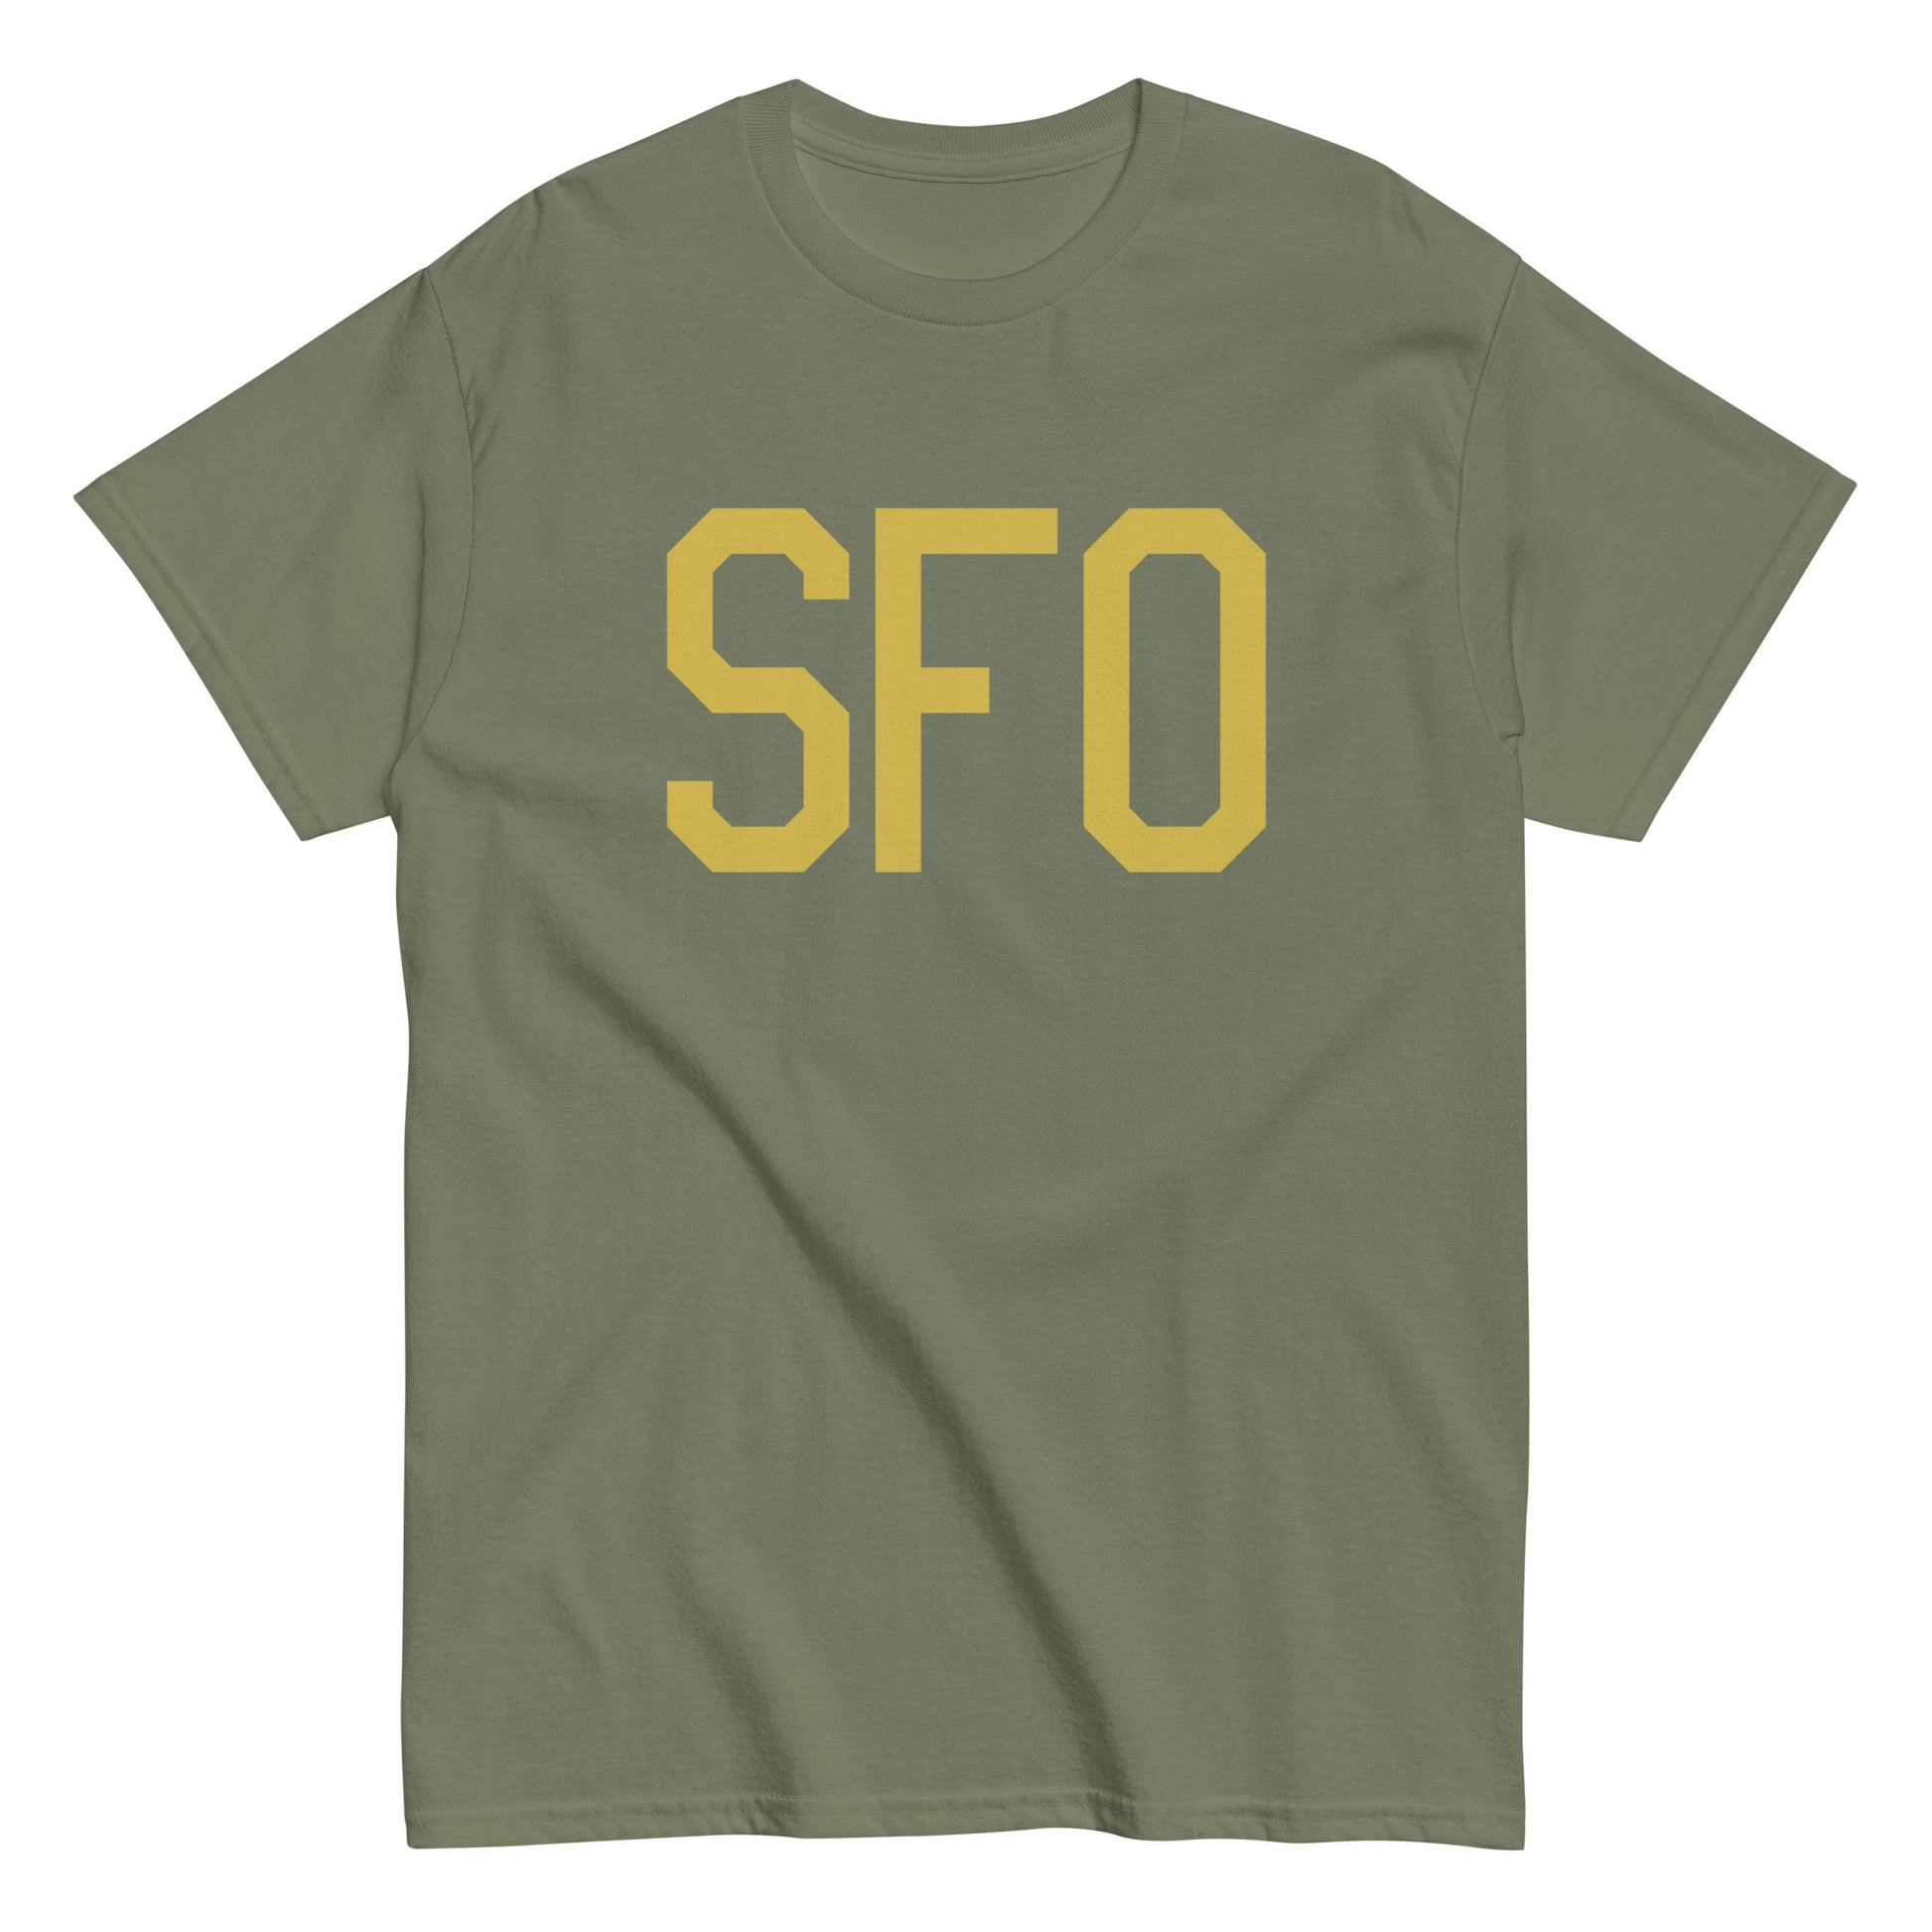 Aviation Enthusiast Men's Tee - Old Gold Graphic • SFO San Francisco • YHM Designs - Image 02